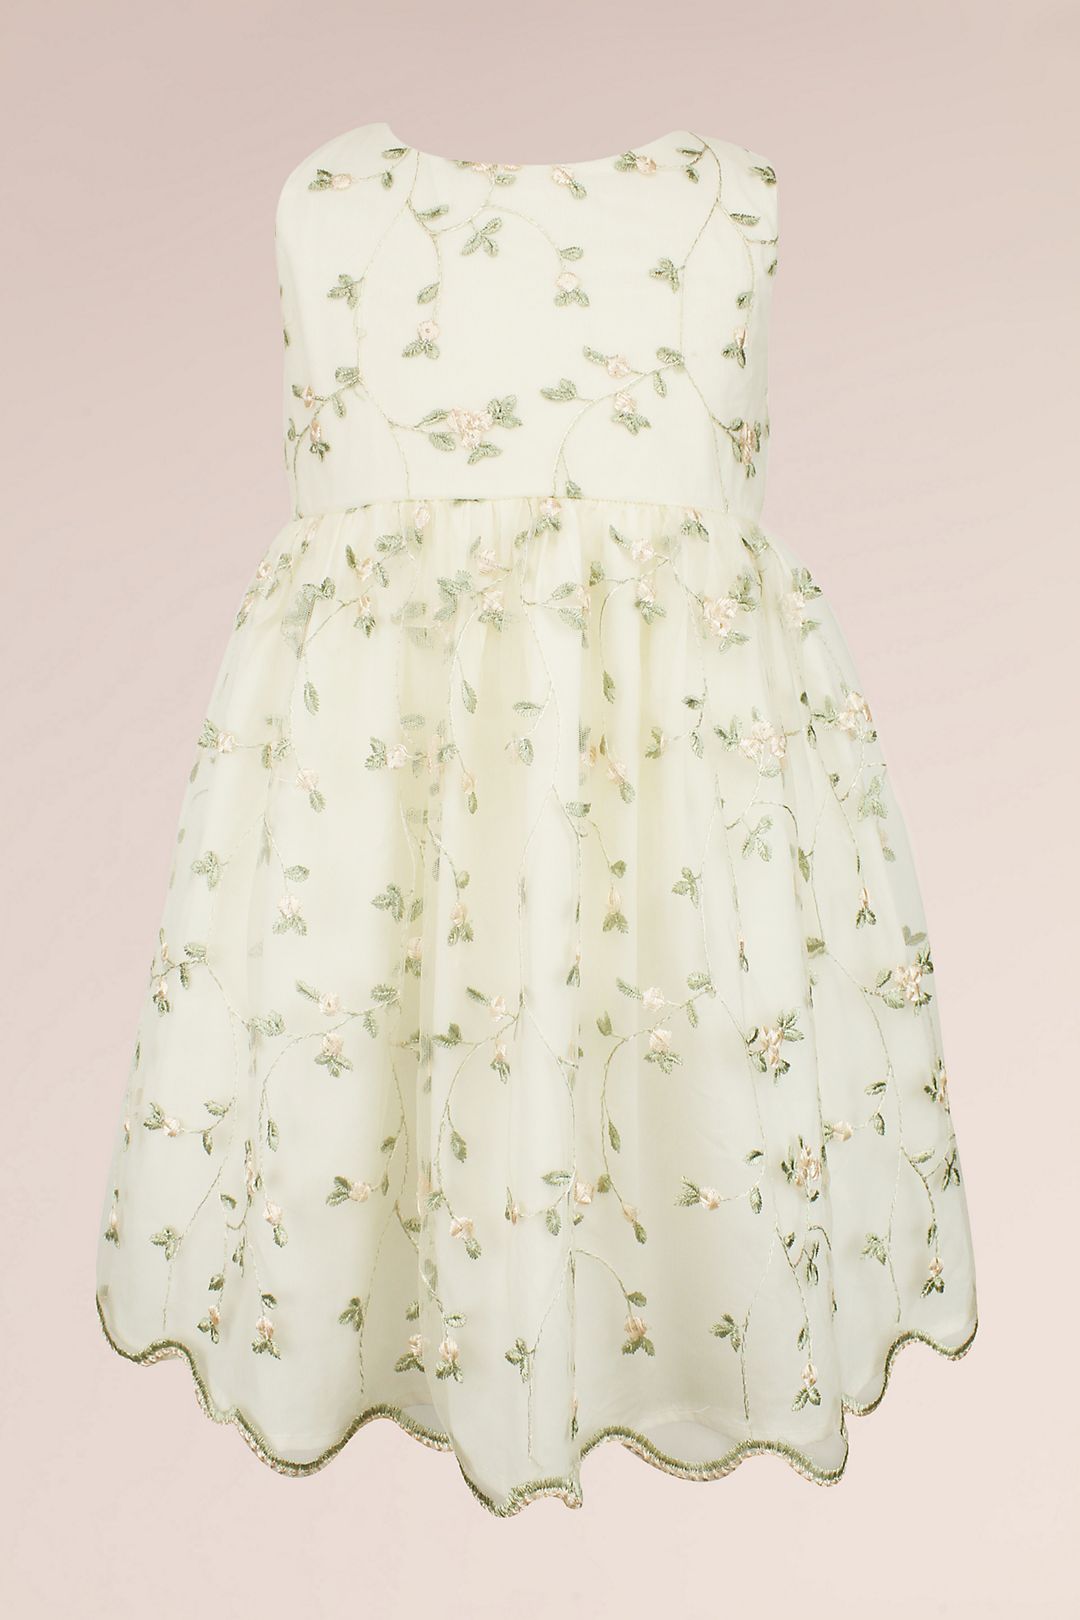 Embroidered Budding Blooms Flower Girl Dress Image 1